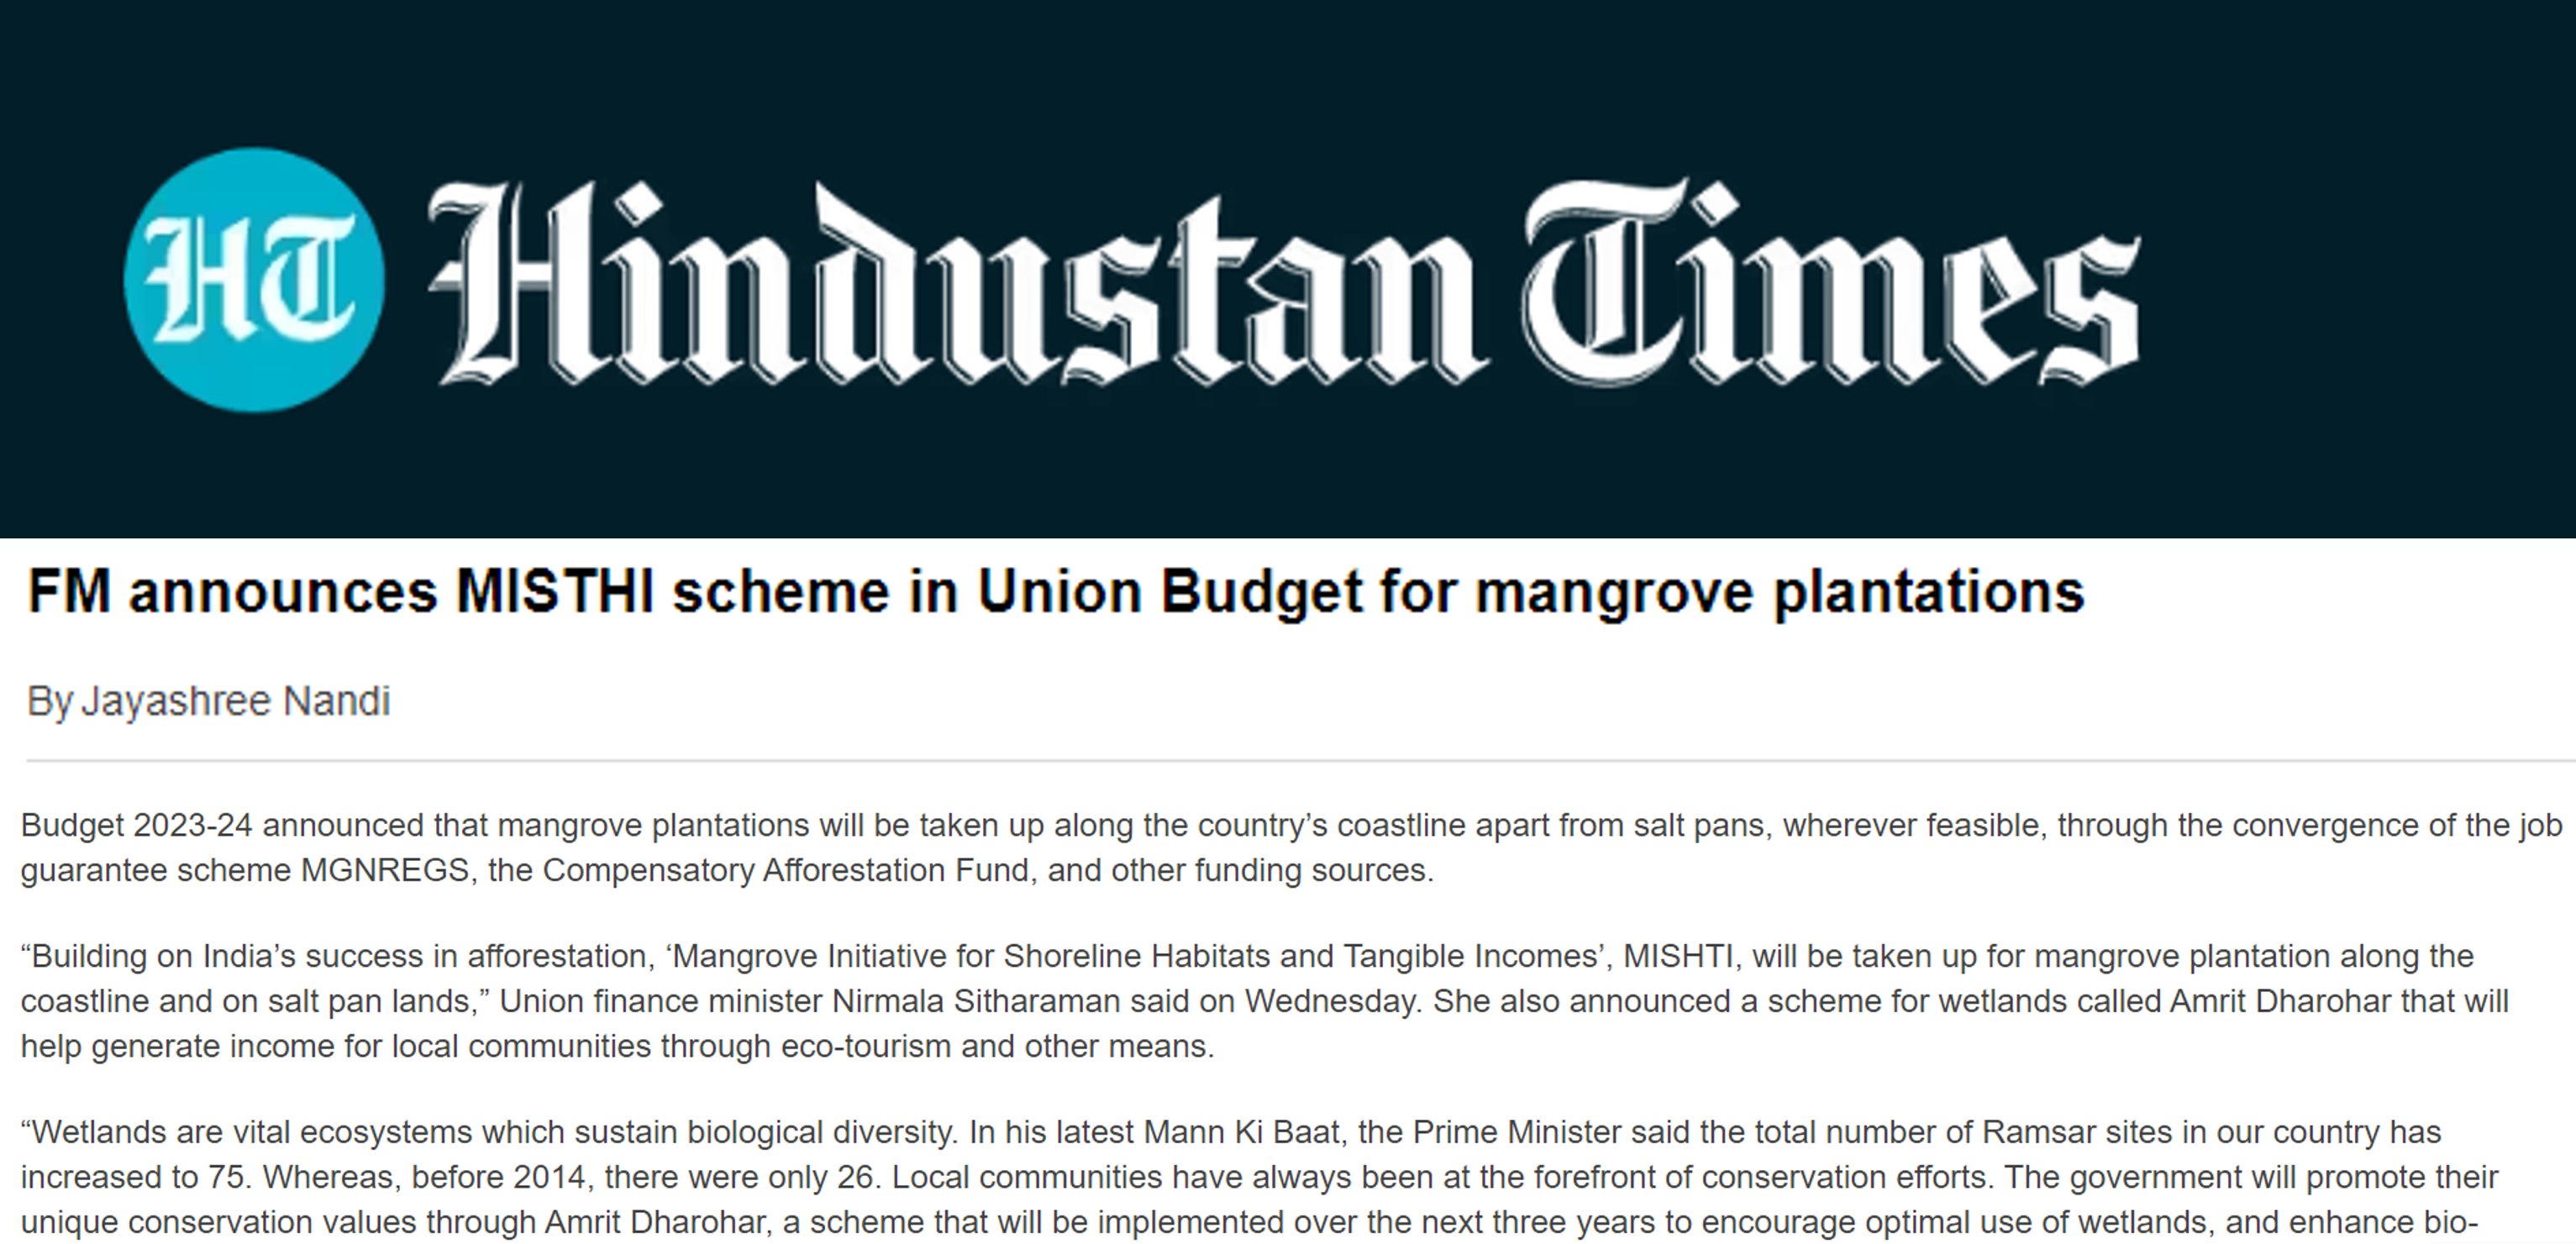 Dr Indu K Murthy quoted by Hindustan Times on the MISTHI scheme for mangrove plantations